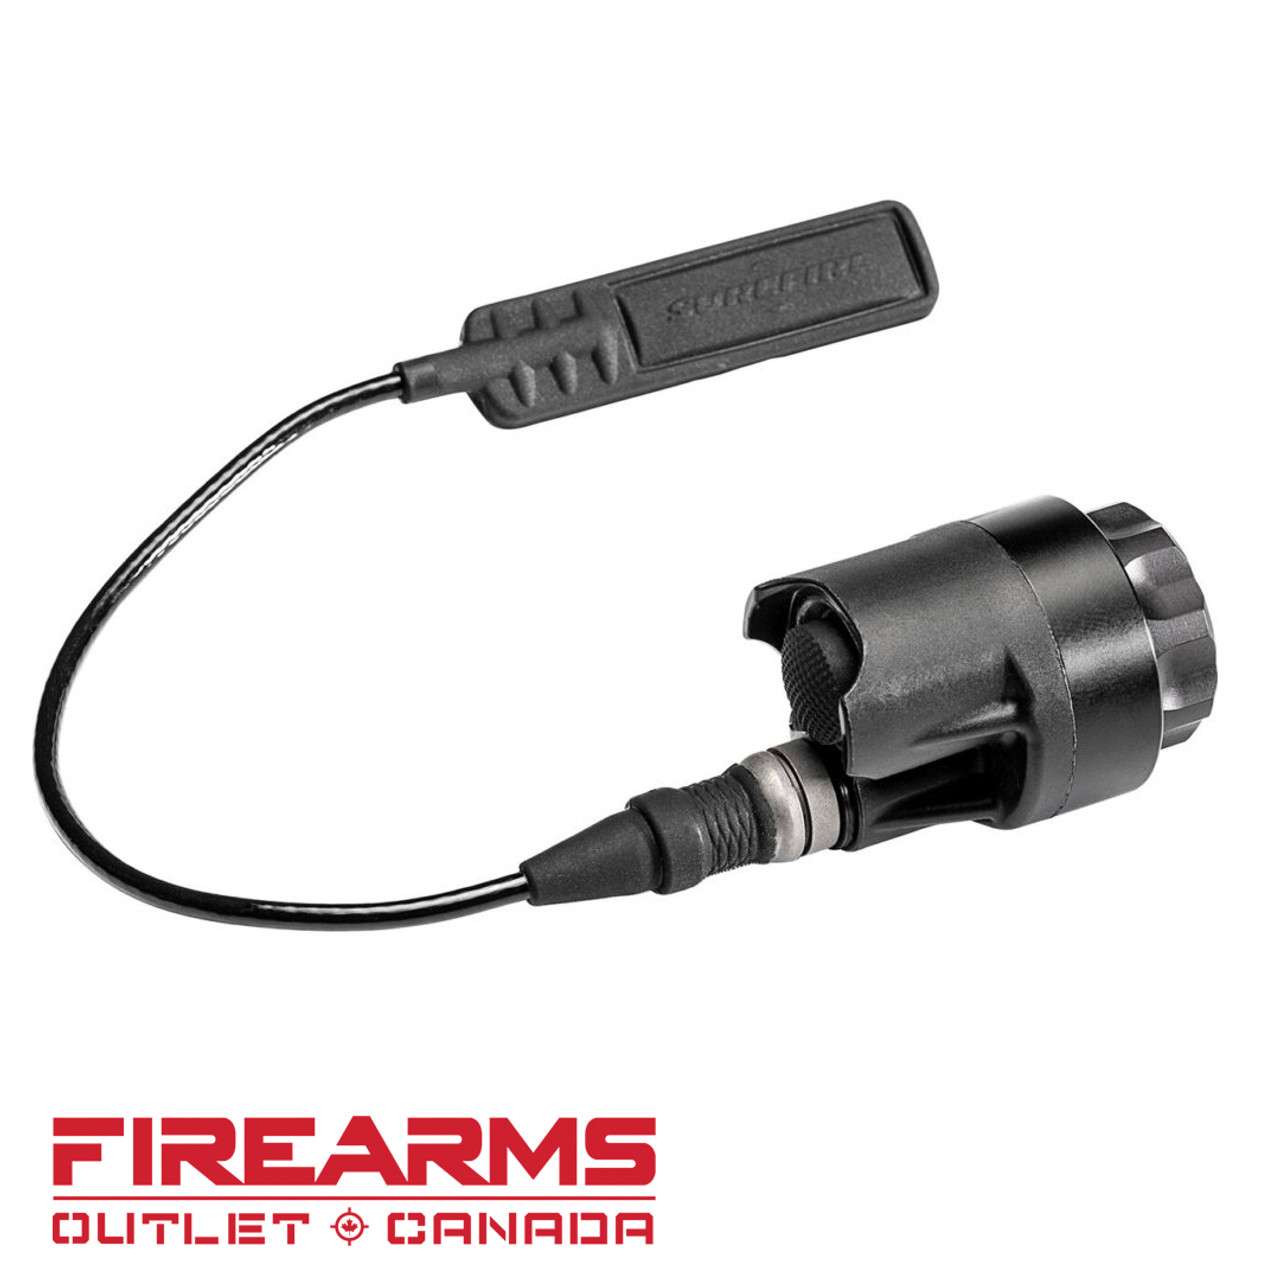 SureFire XM07 Remote Dual Switch Tailcap Assembly for WeaponLights [XM07]